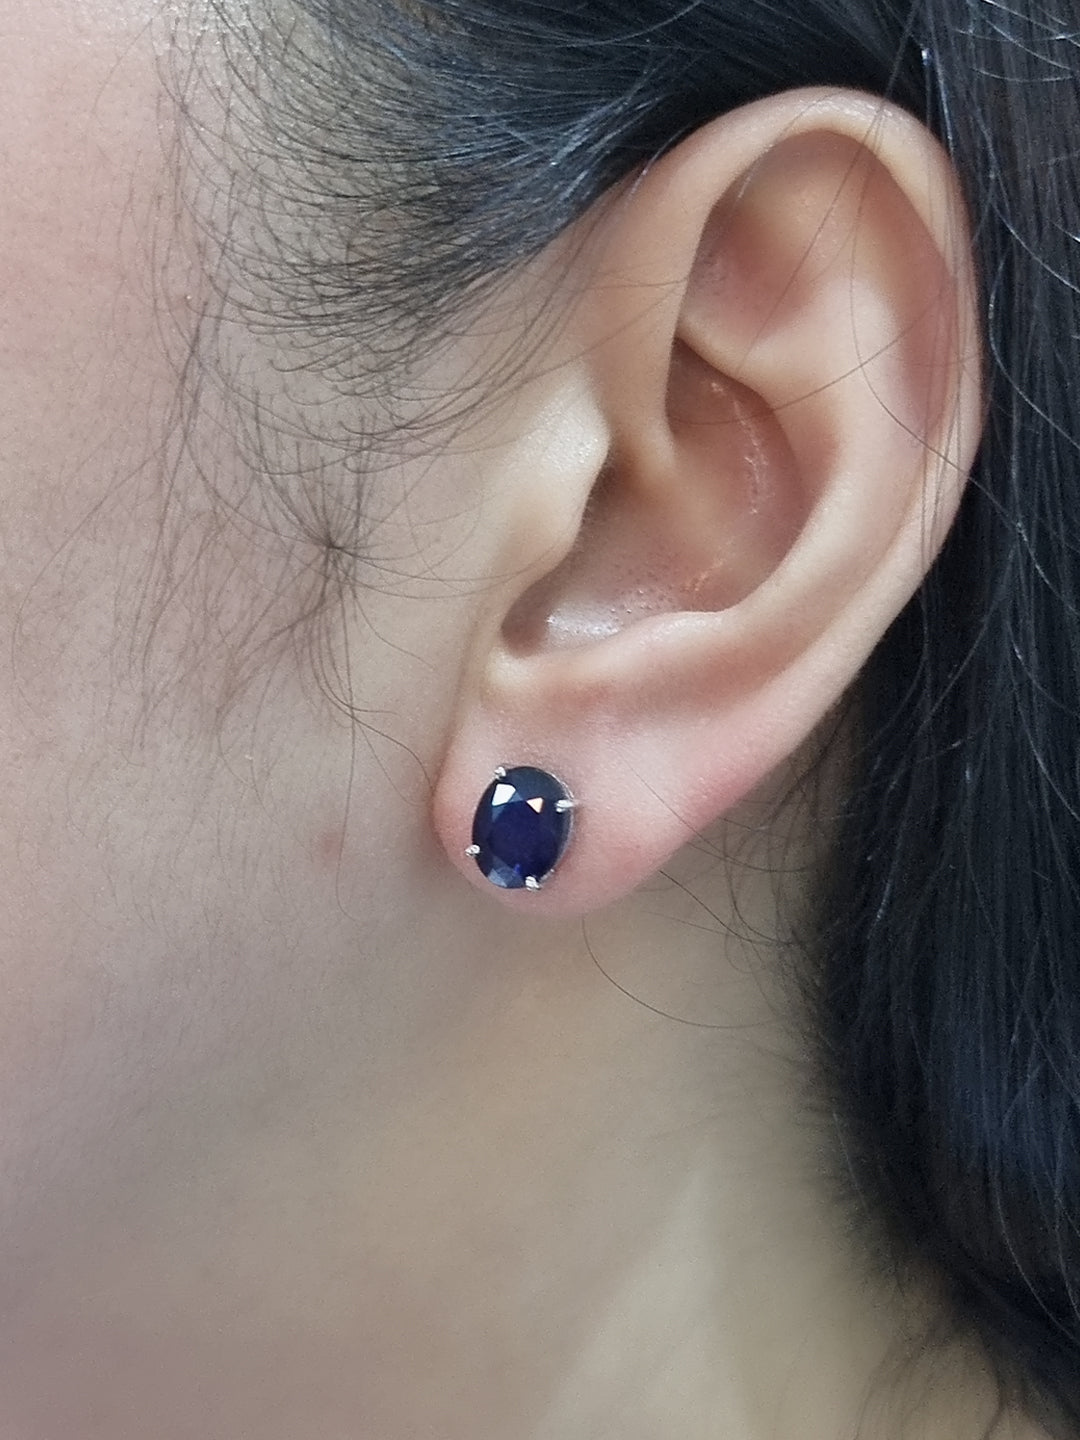 Enjoy The Dashing Twinkle Of These Dazzling Blue Sapphires! This Perfectly Matched Pair Of Oval-Shaped Gems Are Set In An 18k White Gold Setting, Secured With Four Prongs And Push Backs, For A Look That’s Truly Show-Stopping! Perfect For Adding A Hint Of Chic Sparkle To Any Ensemble. Let The Sapphires Do The Talking!